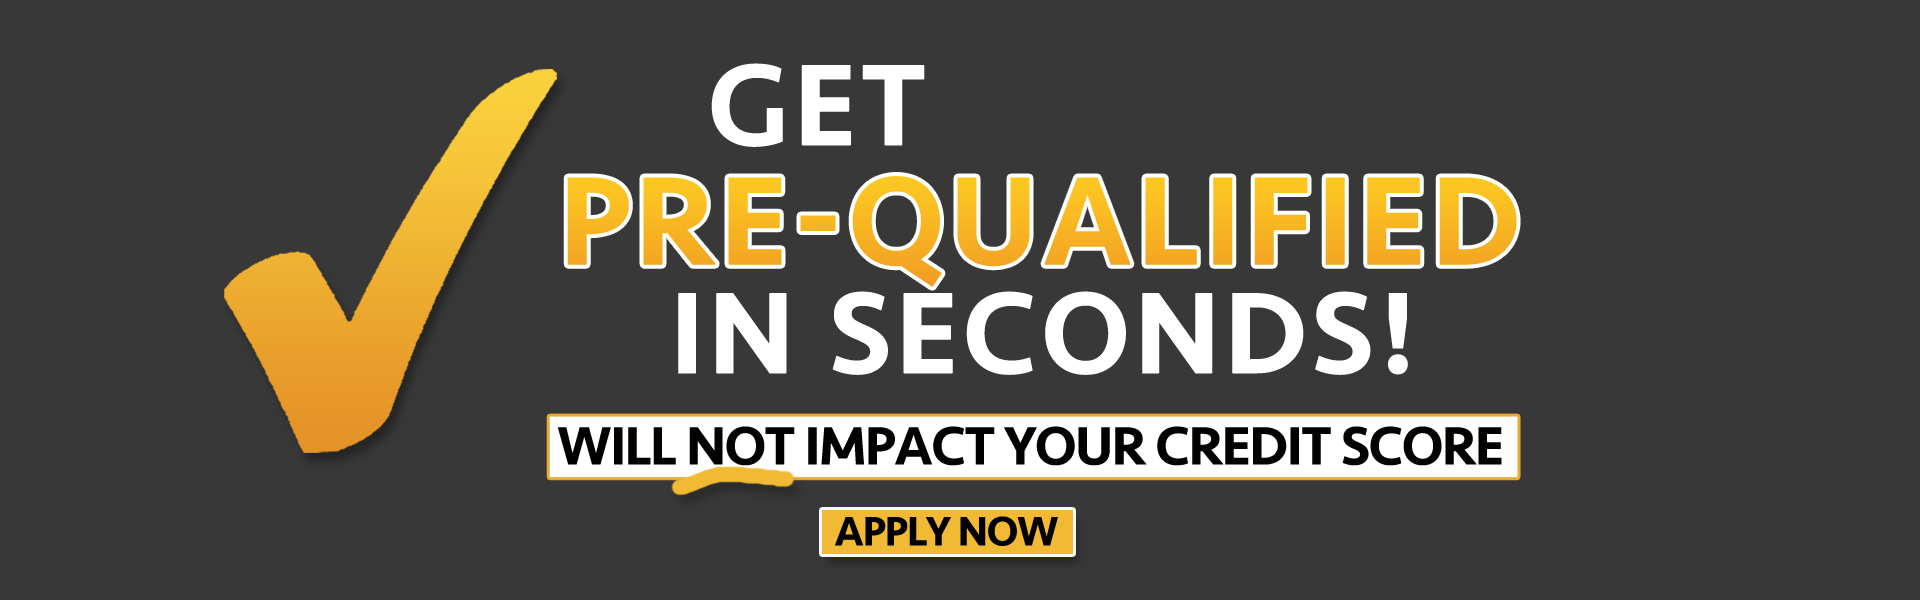 Get Pre-Qualified In Seconds